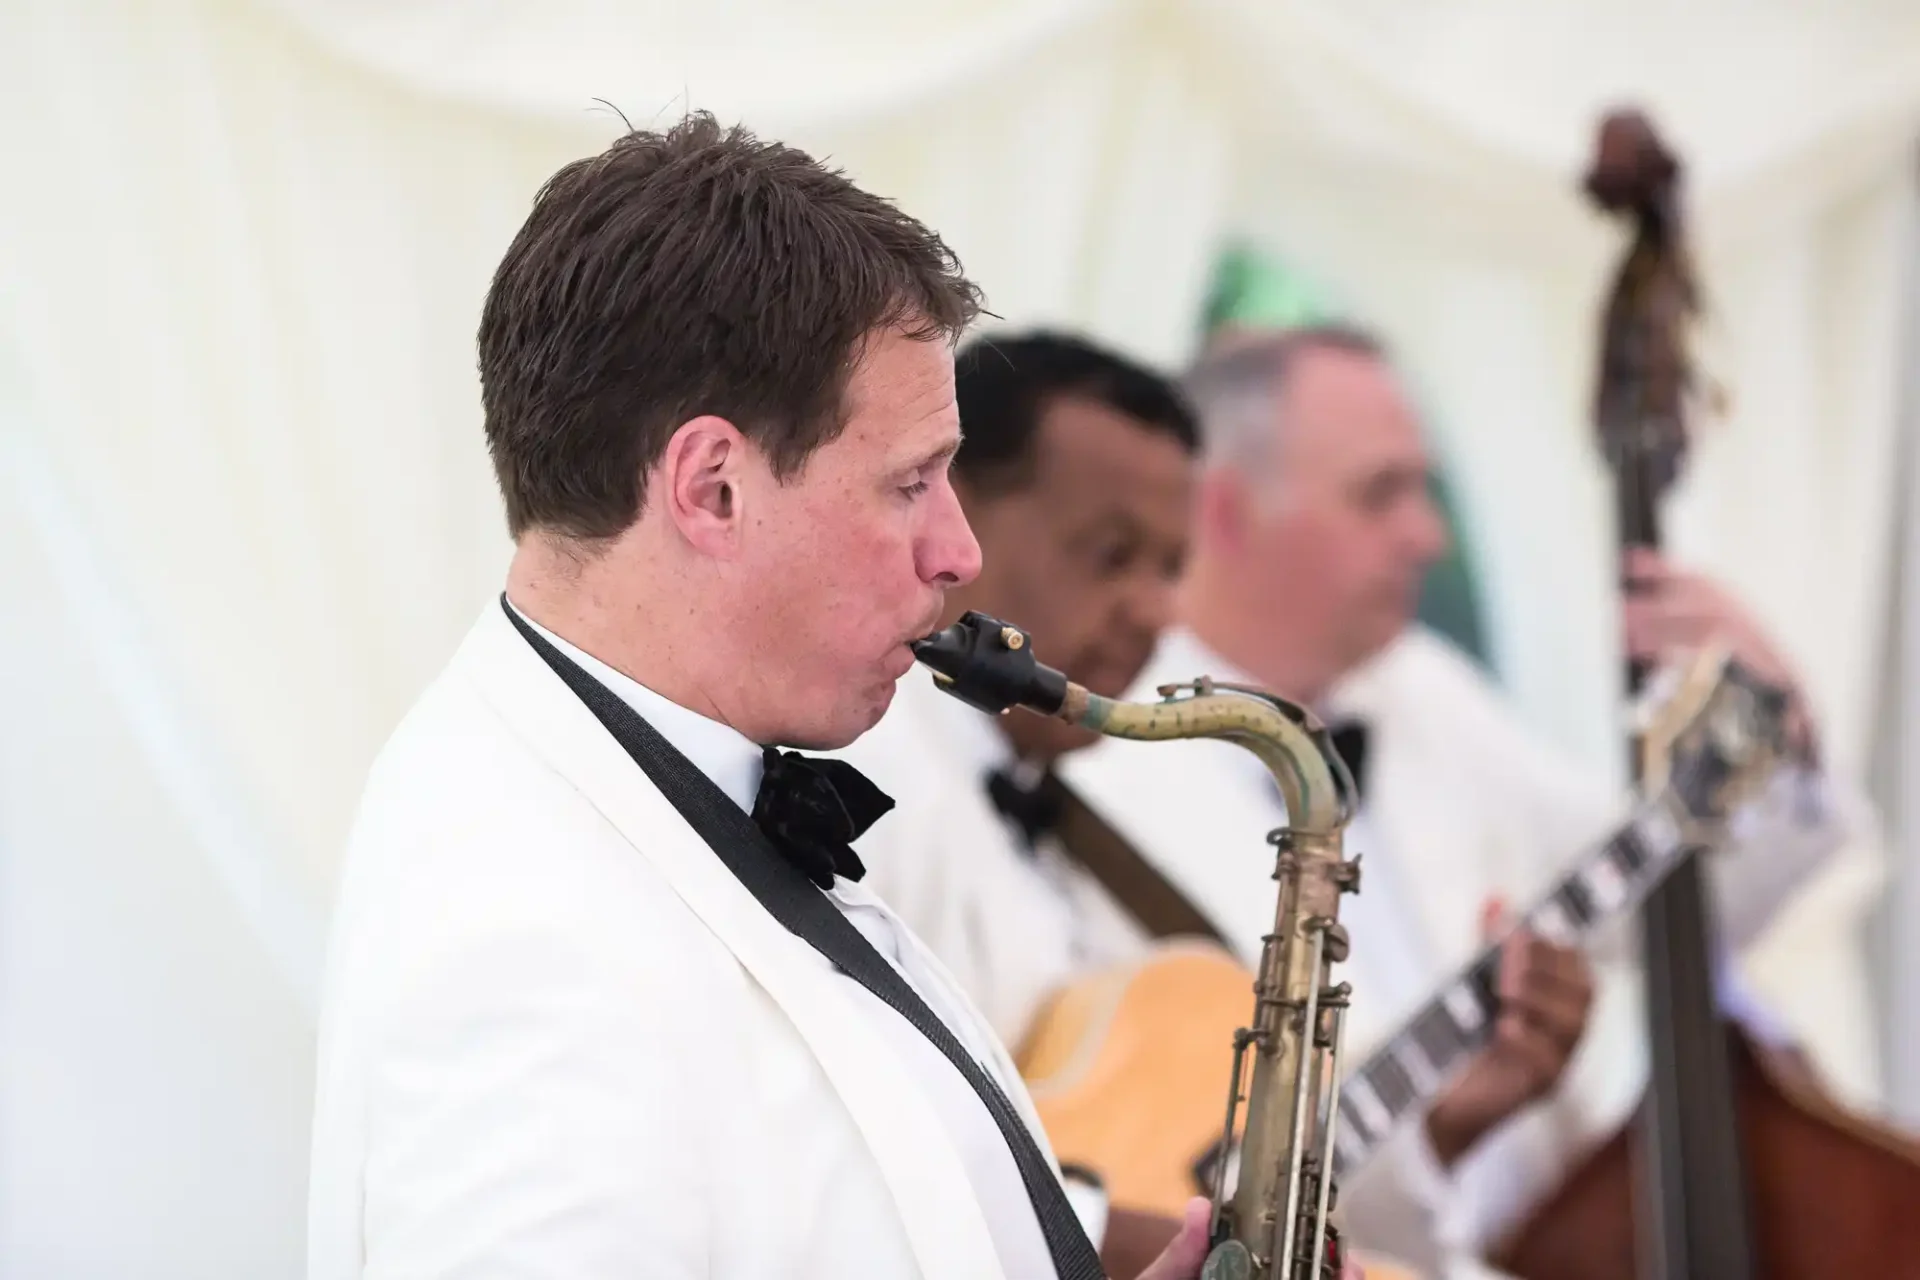 A man in a tuxedo playing the saxophone, accompanied by musicians on guitar and double bass under a white tent.